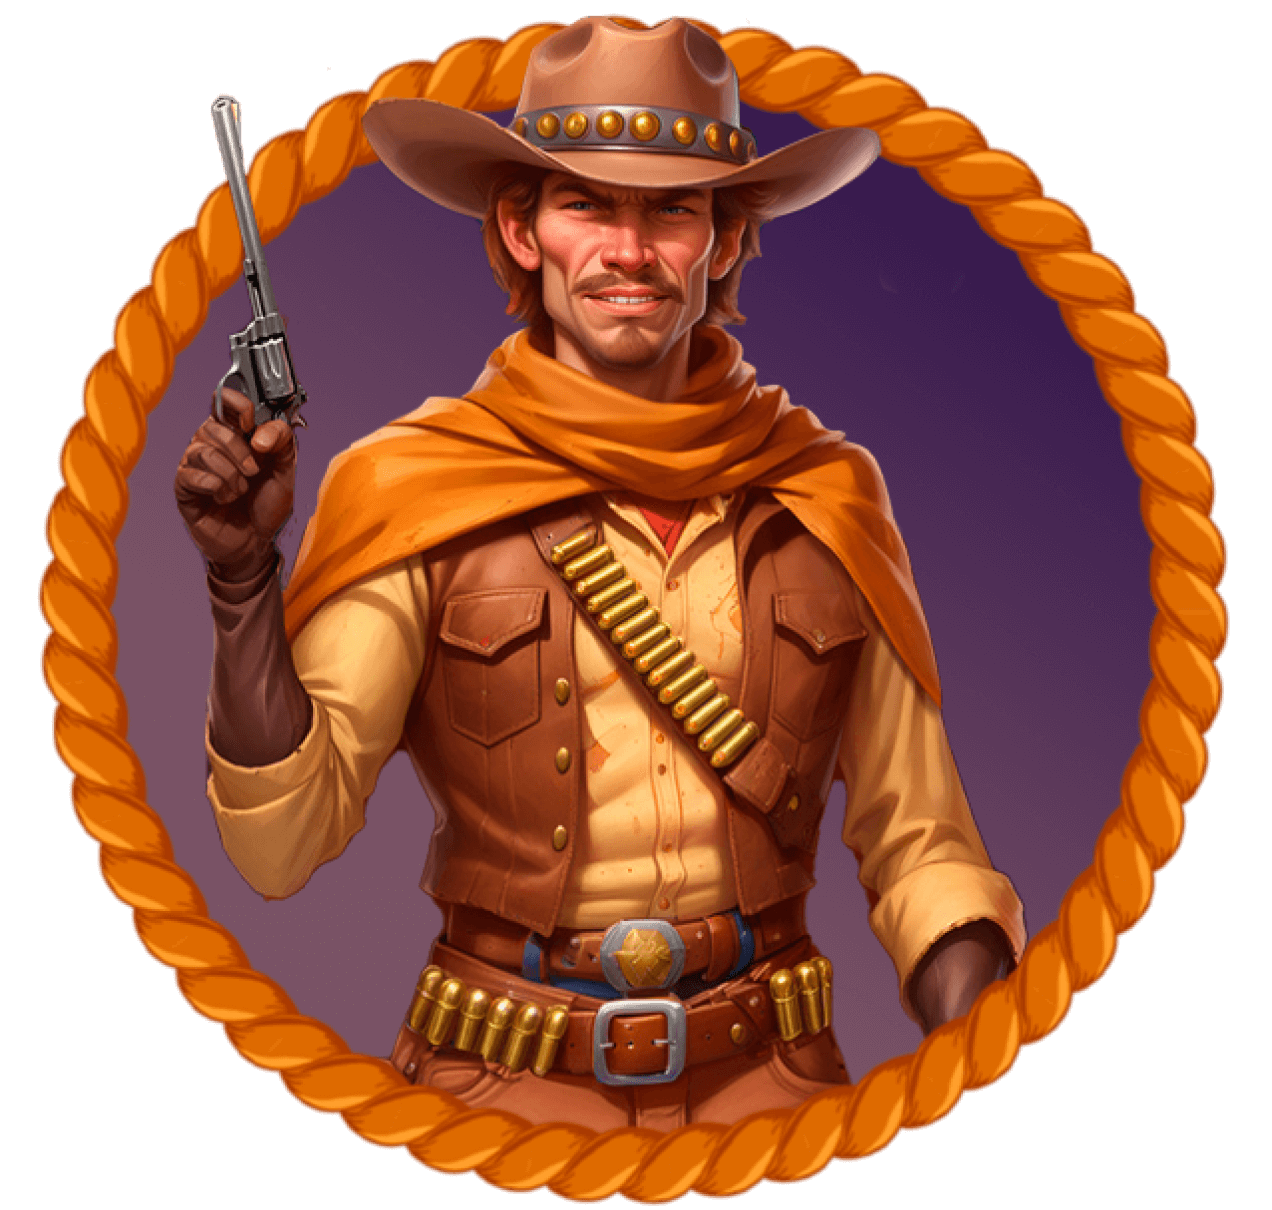 Cowboy with gold coins